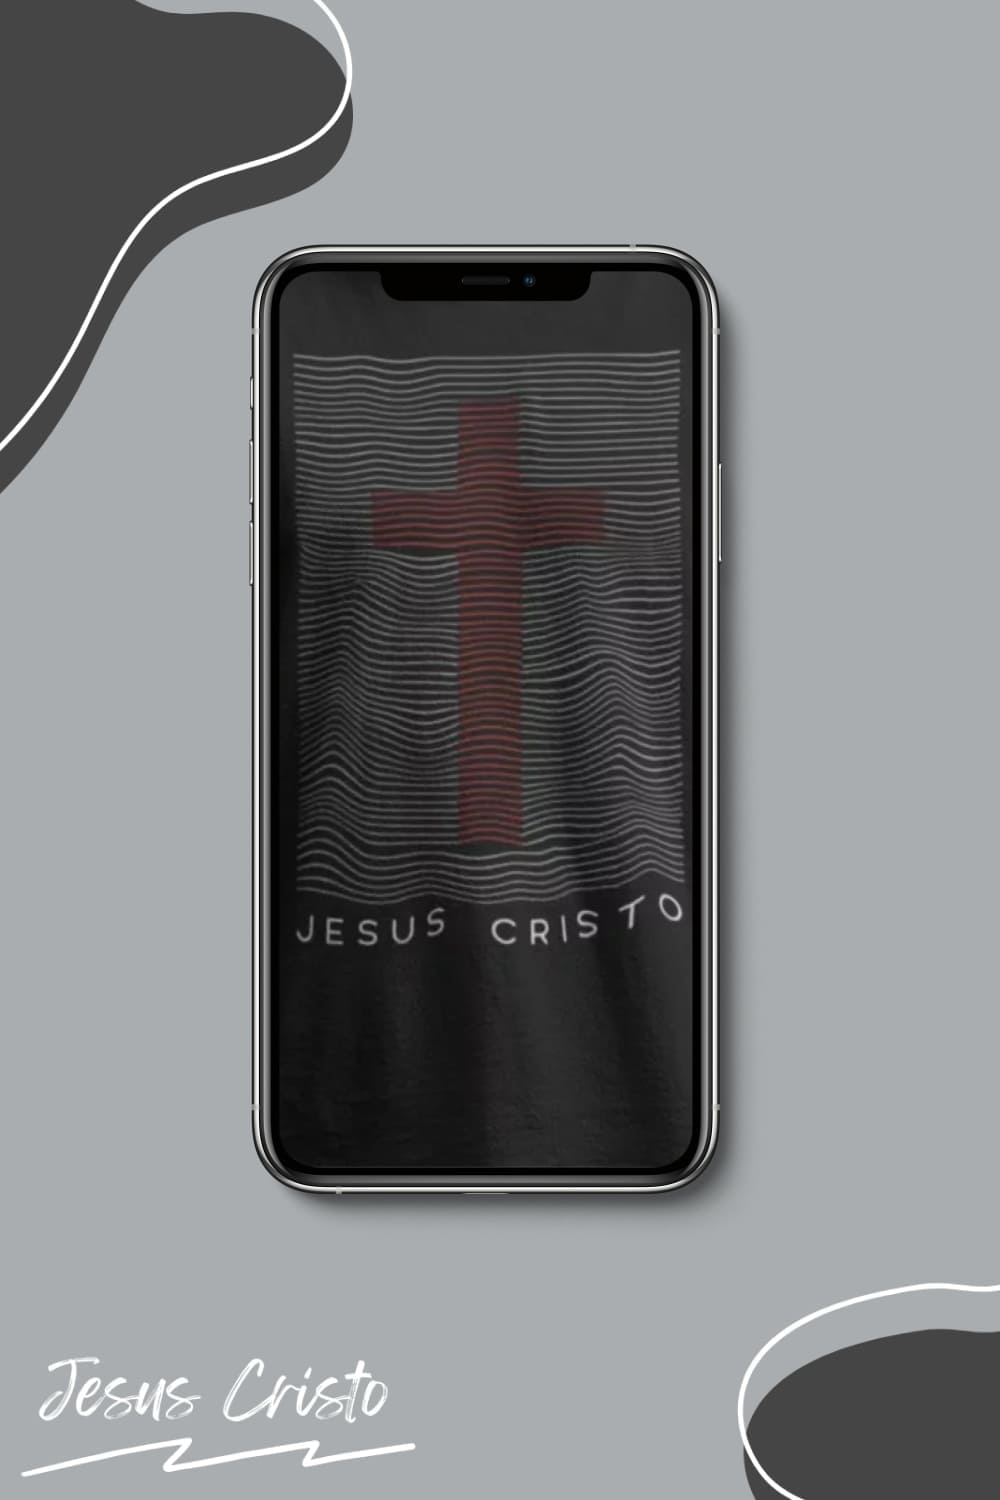 The inscription Jesus Christ under a red cross on the smartphone screen, picture for pinterest.